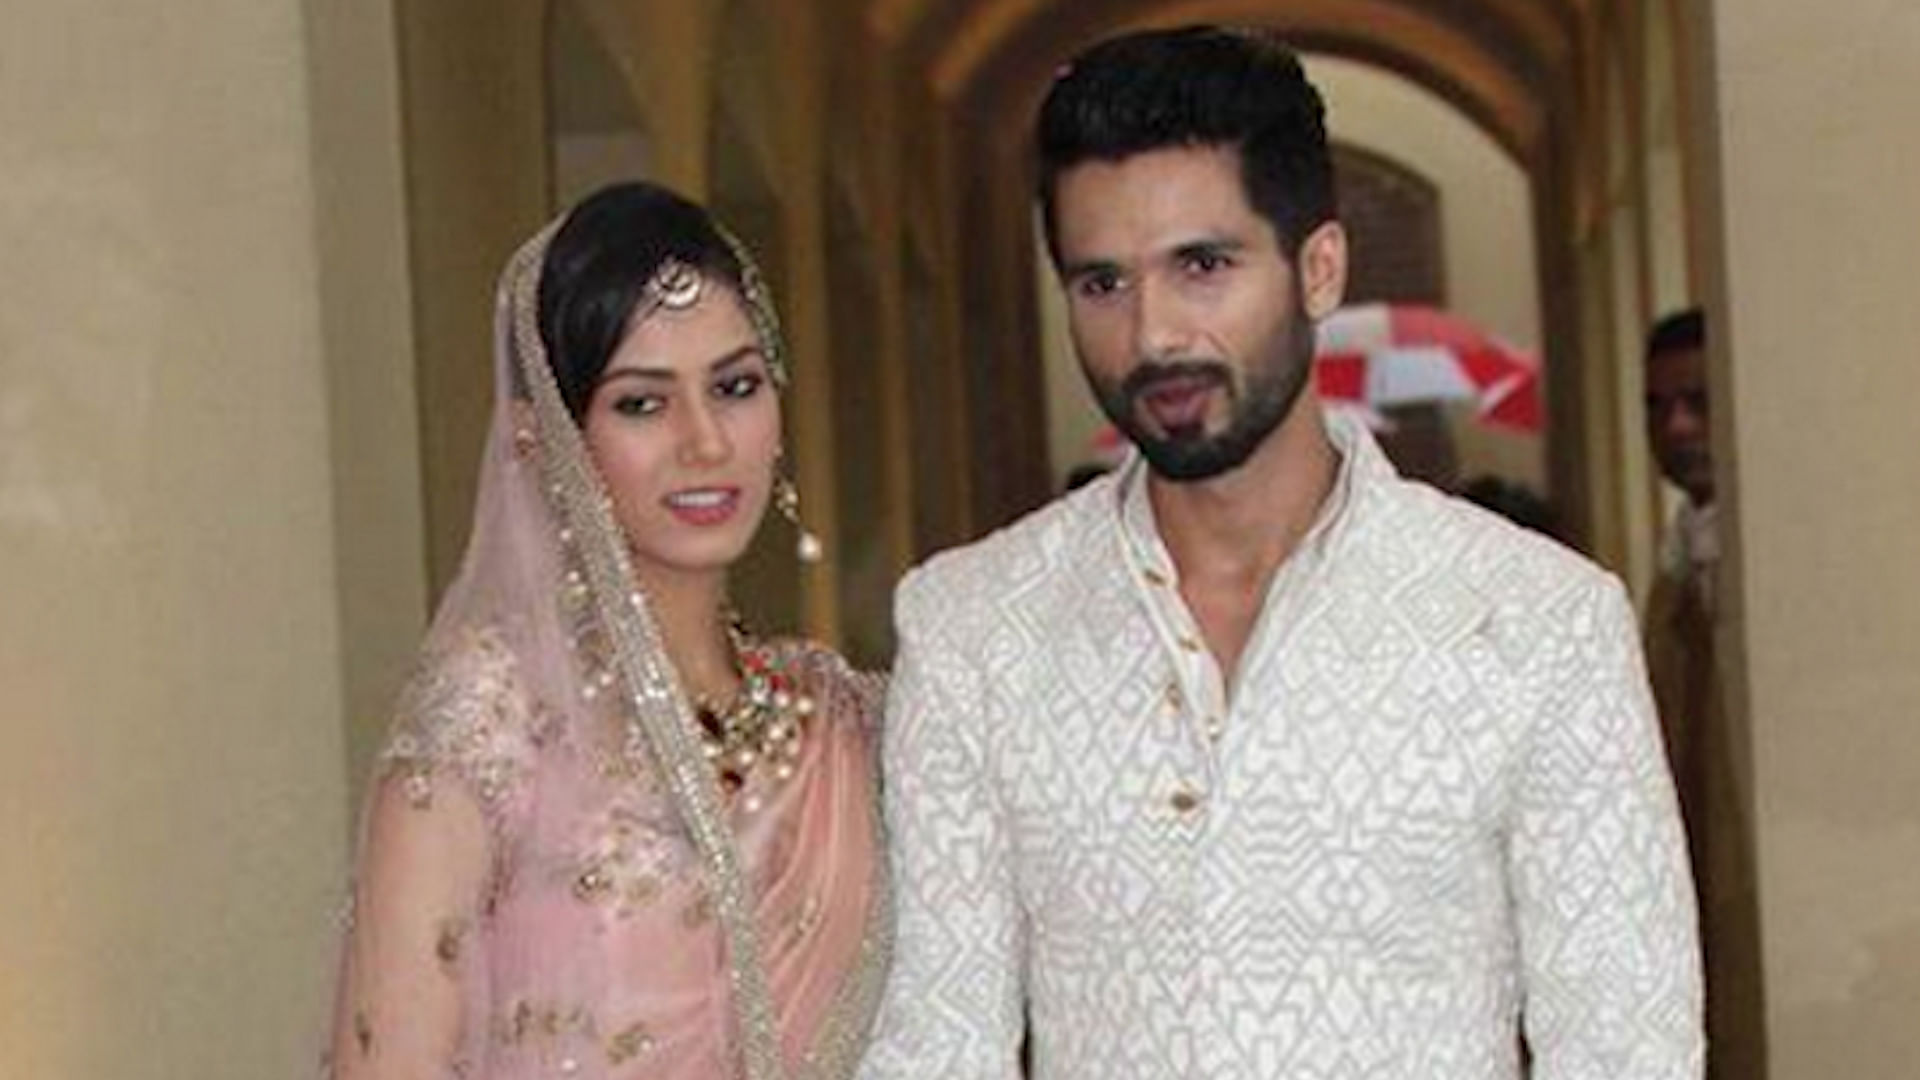 Just Married: Shahid Kapoor and Mira Kapoor 